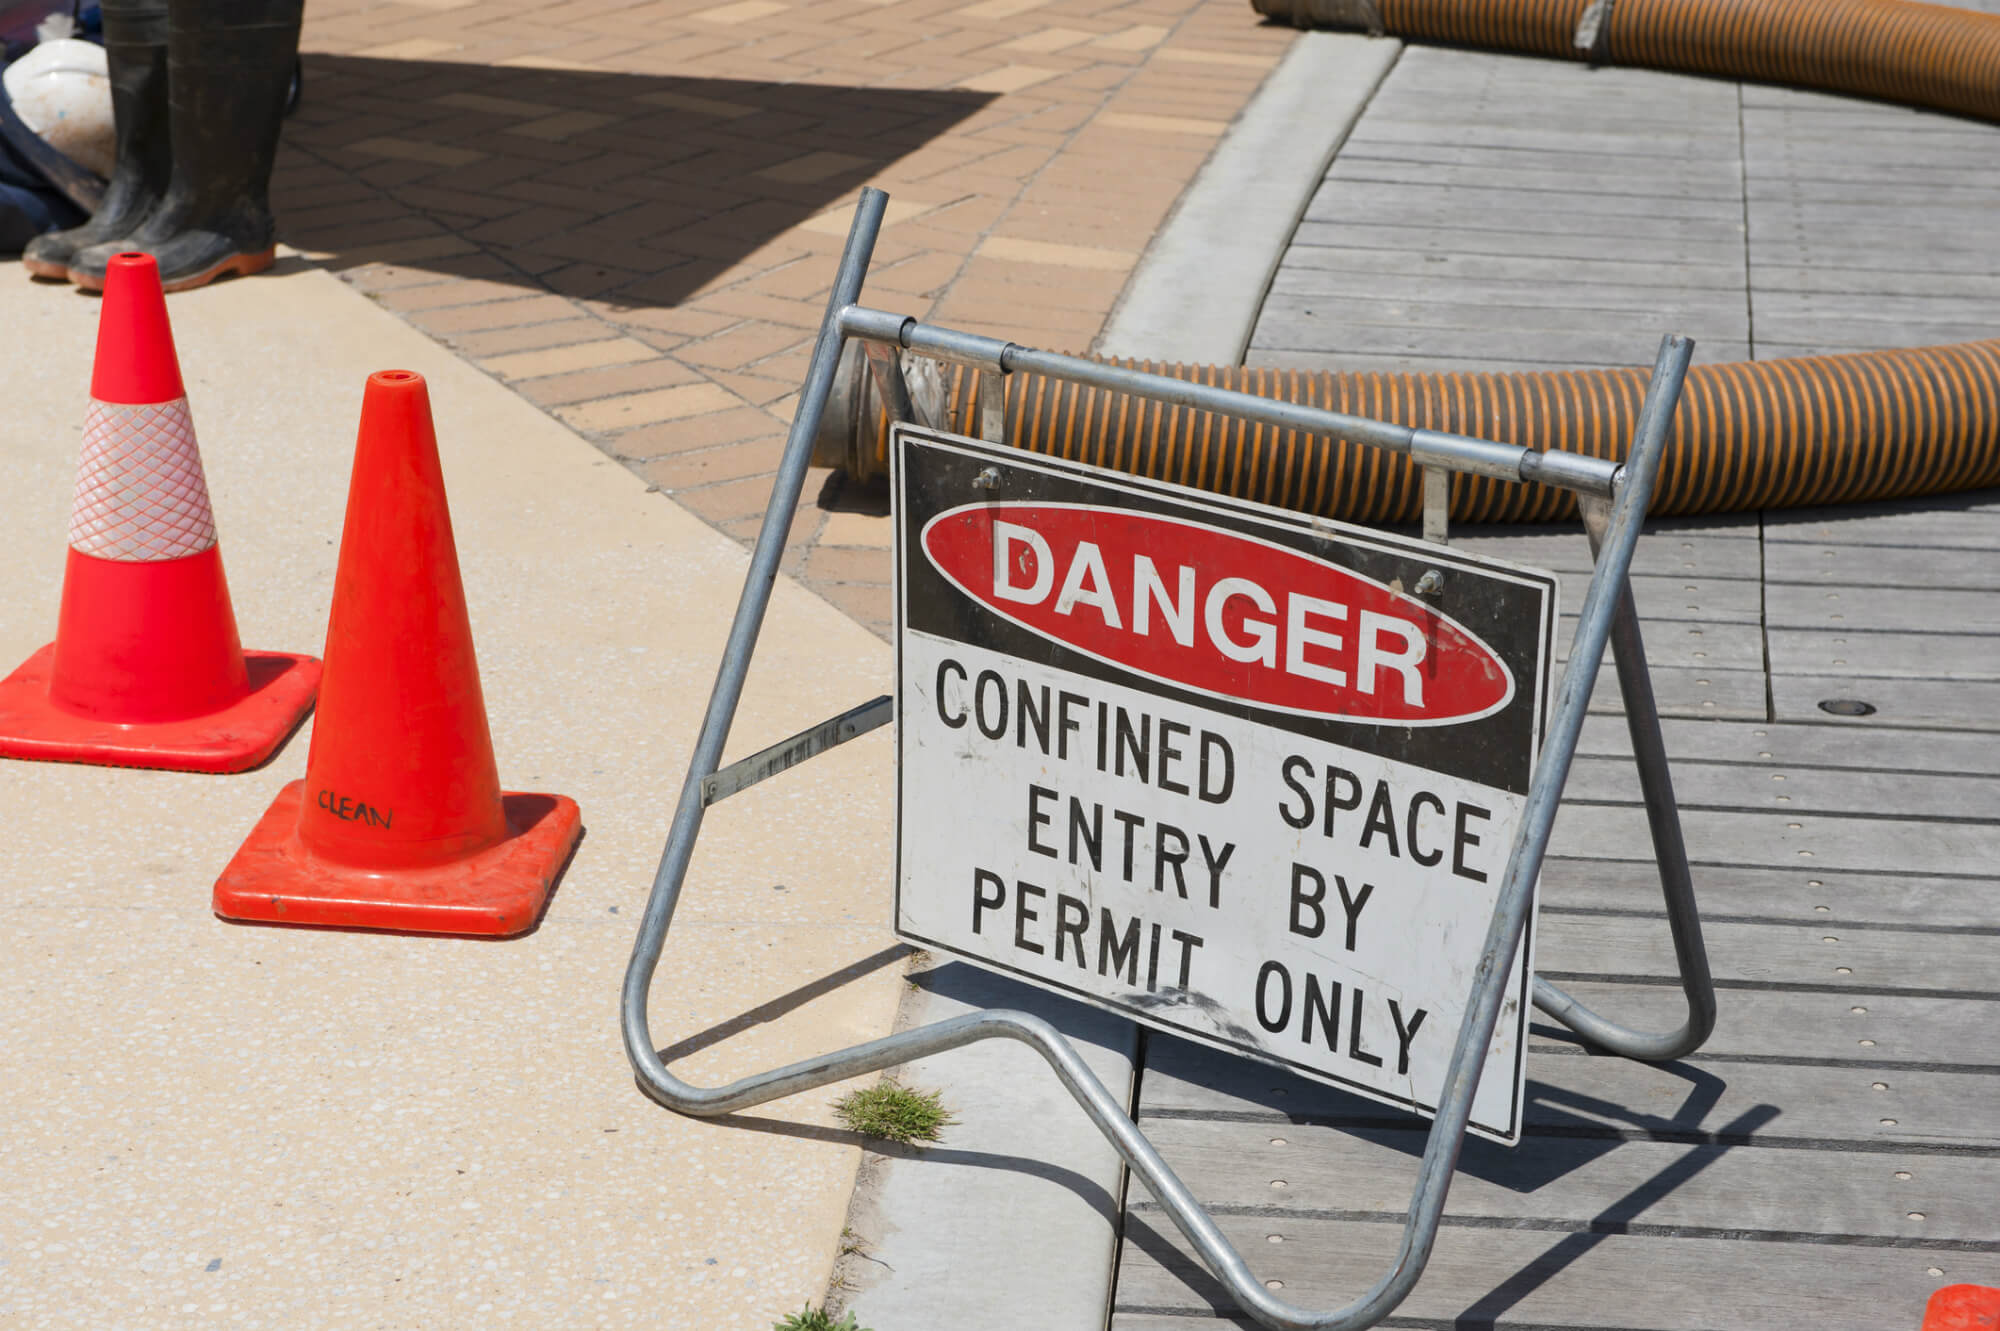 What risks need to be considered when rescuing someone from a confined space?